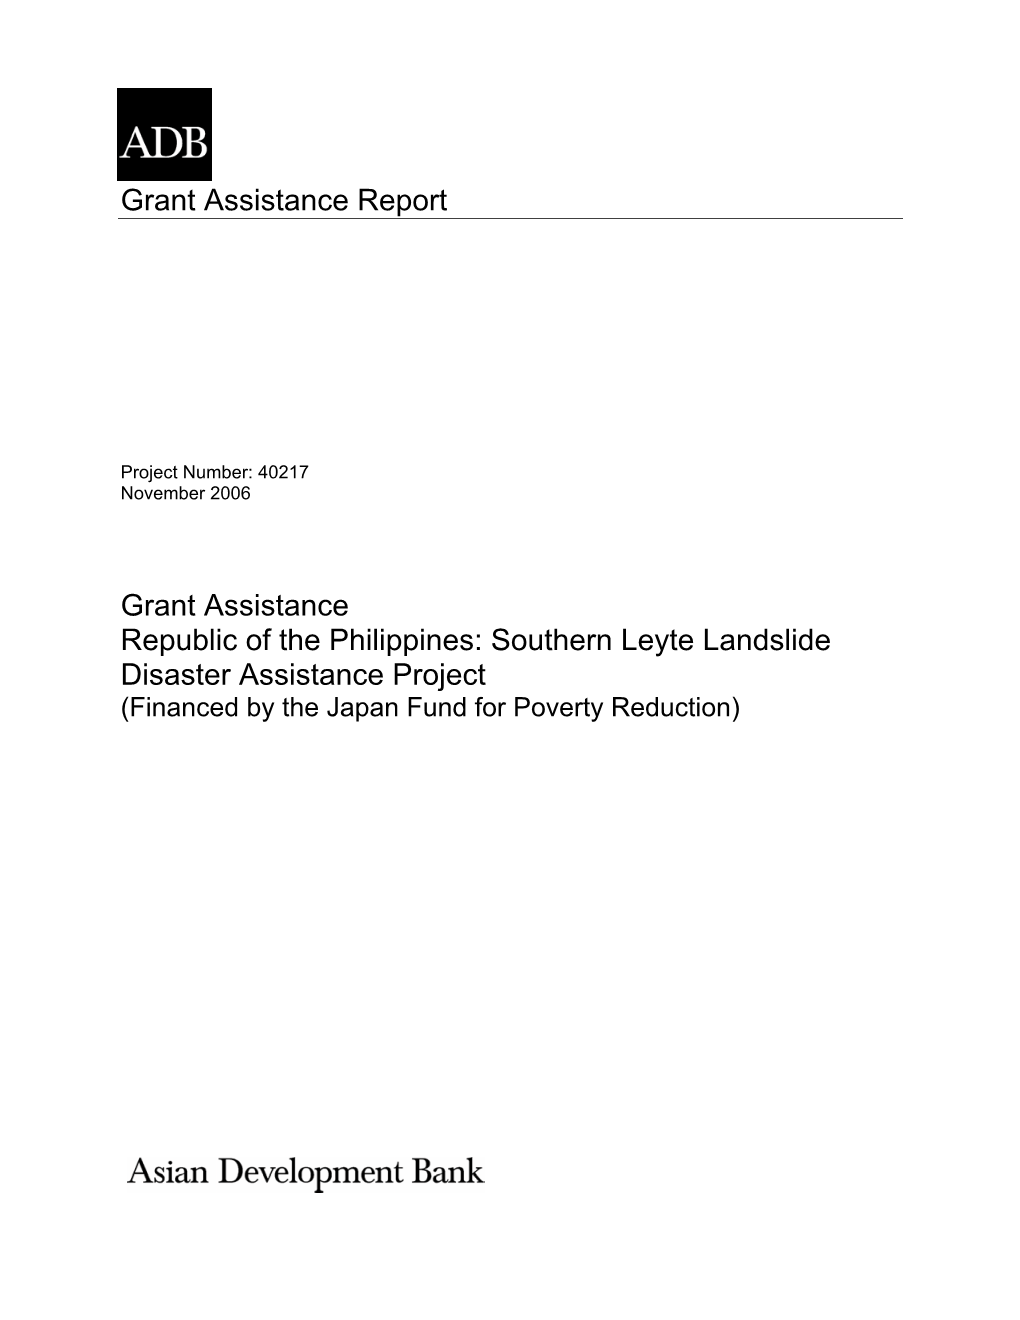 Southern Leyte Landslide Disaster Assistance Project (Financed by the Japan Fund for Poverty Reduction)